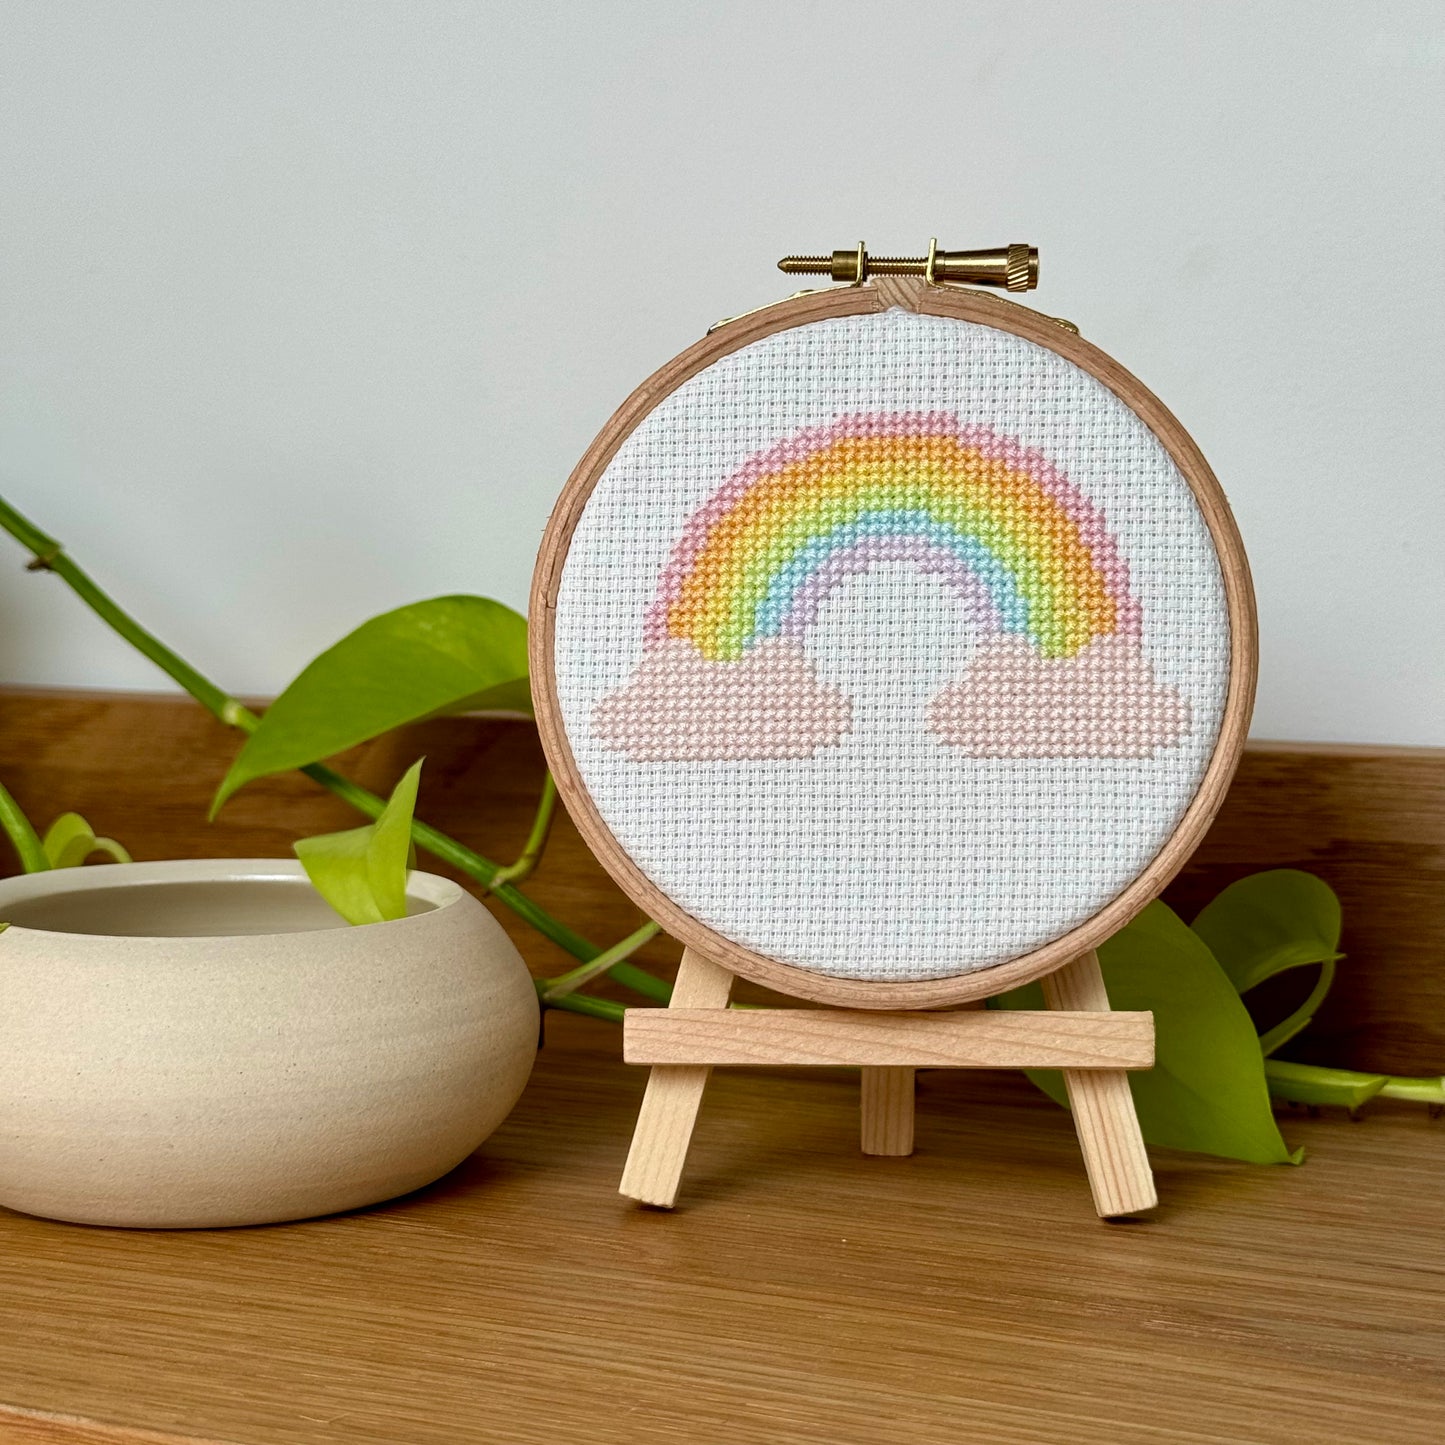 Over the Rainbow Cross Stitch Pattern – PDF Download